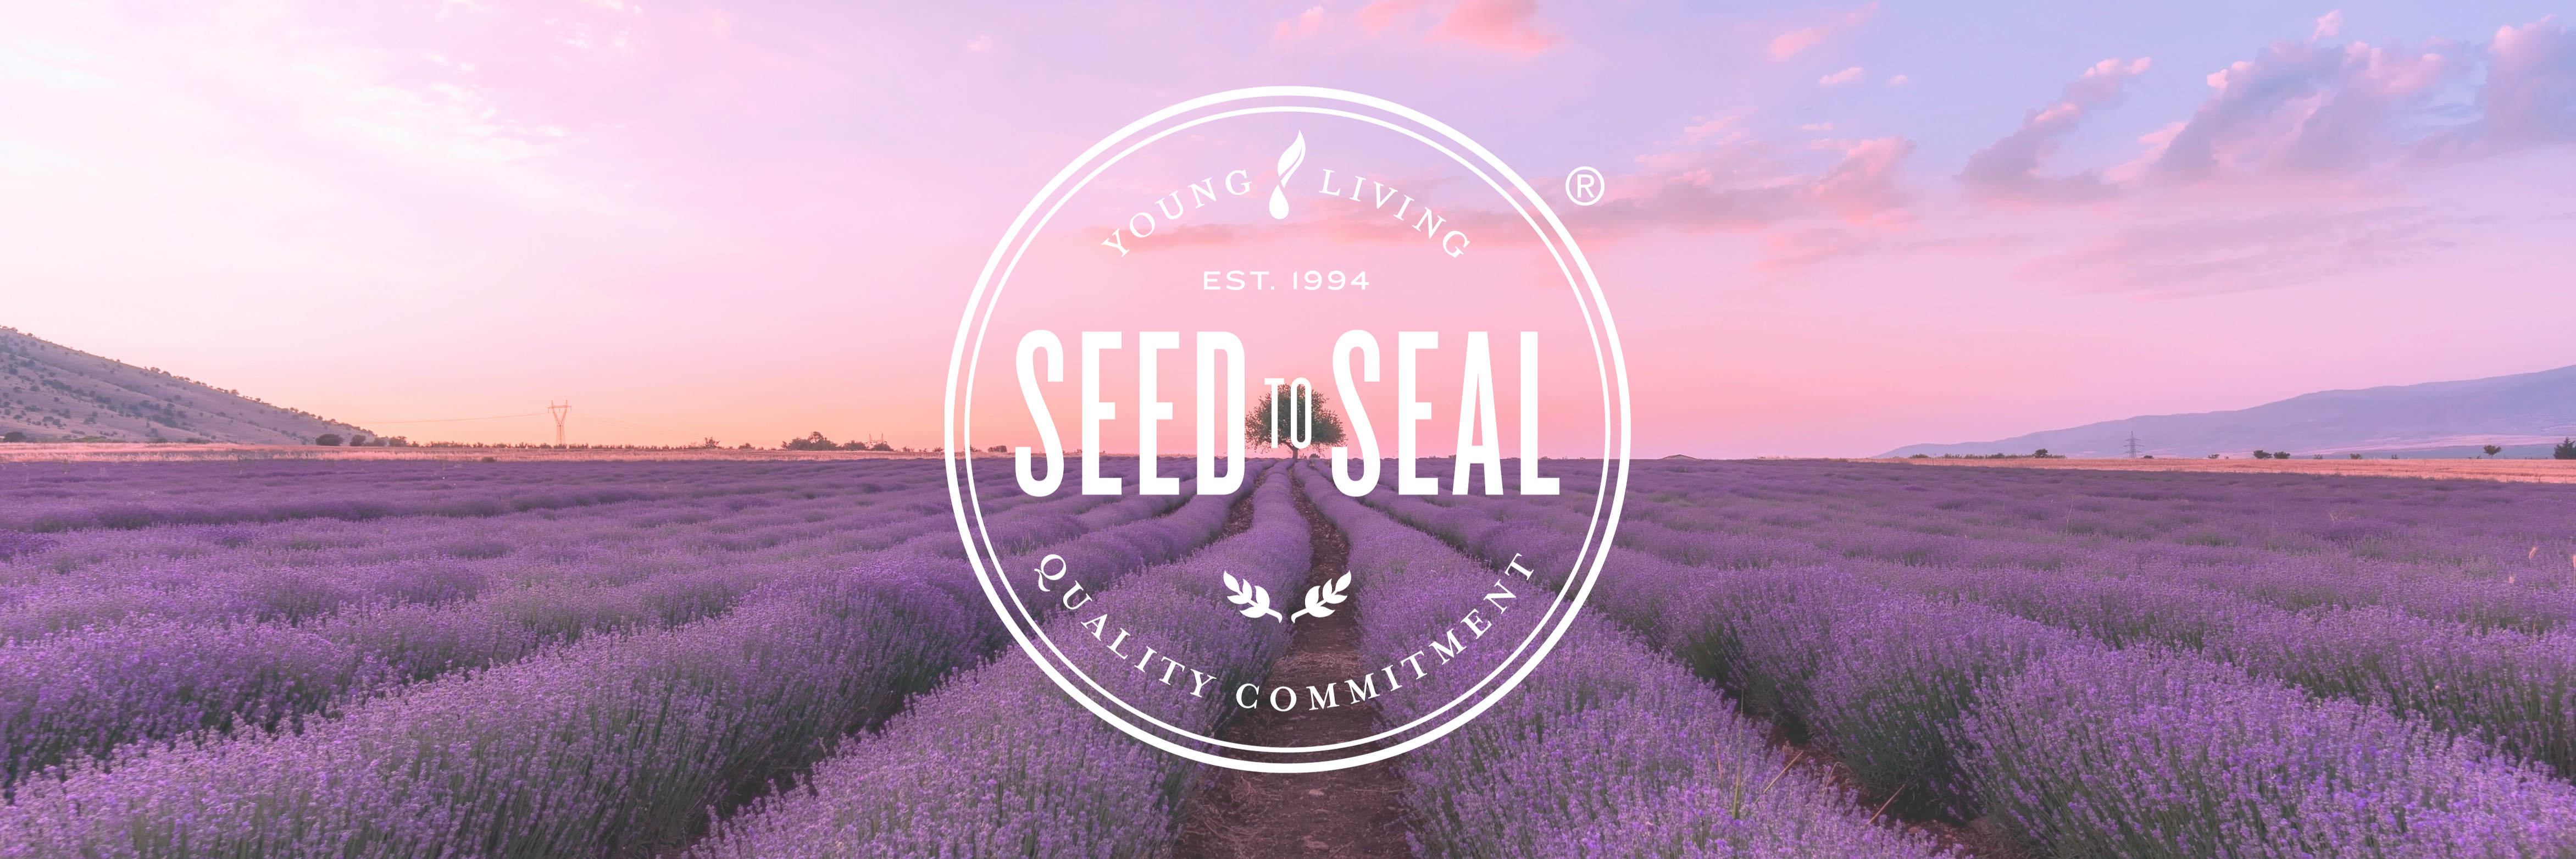 SEED TO SEAL | banner | Rigtsje.nl